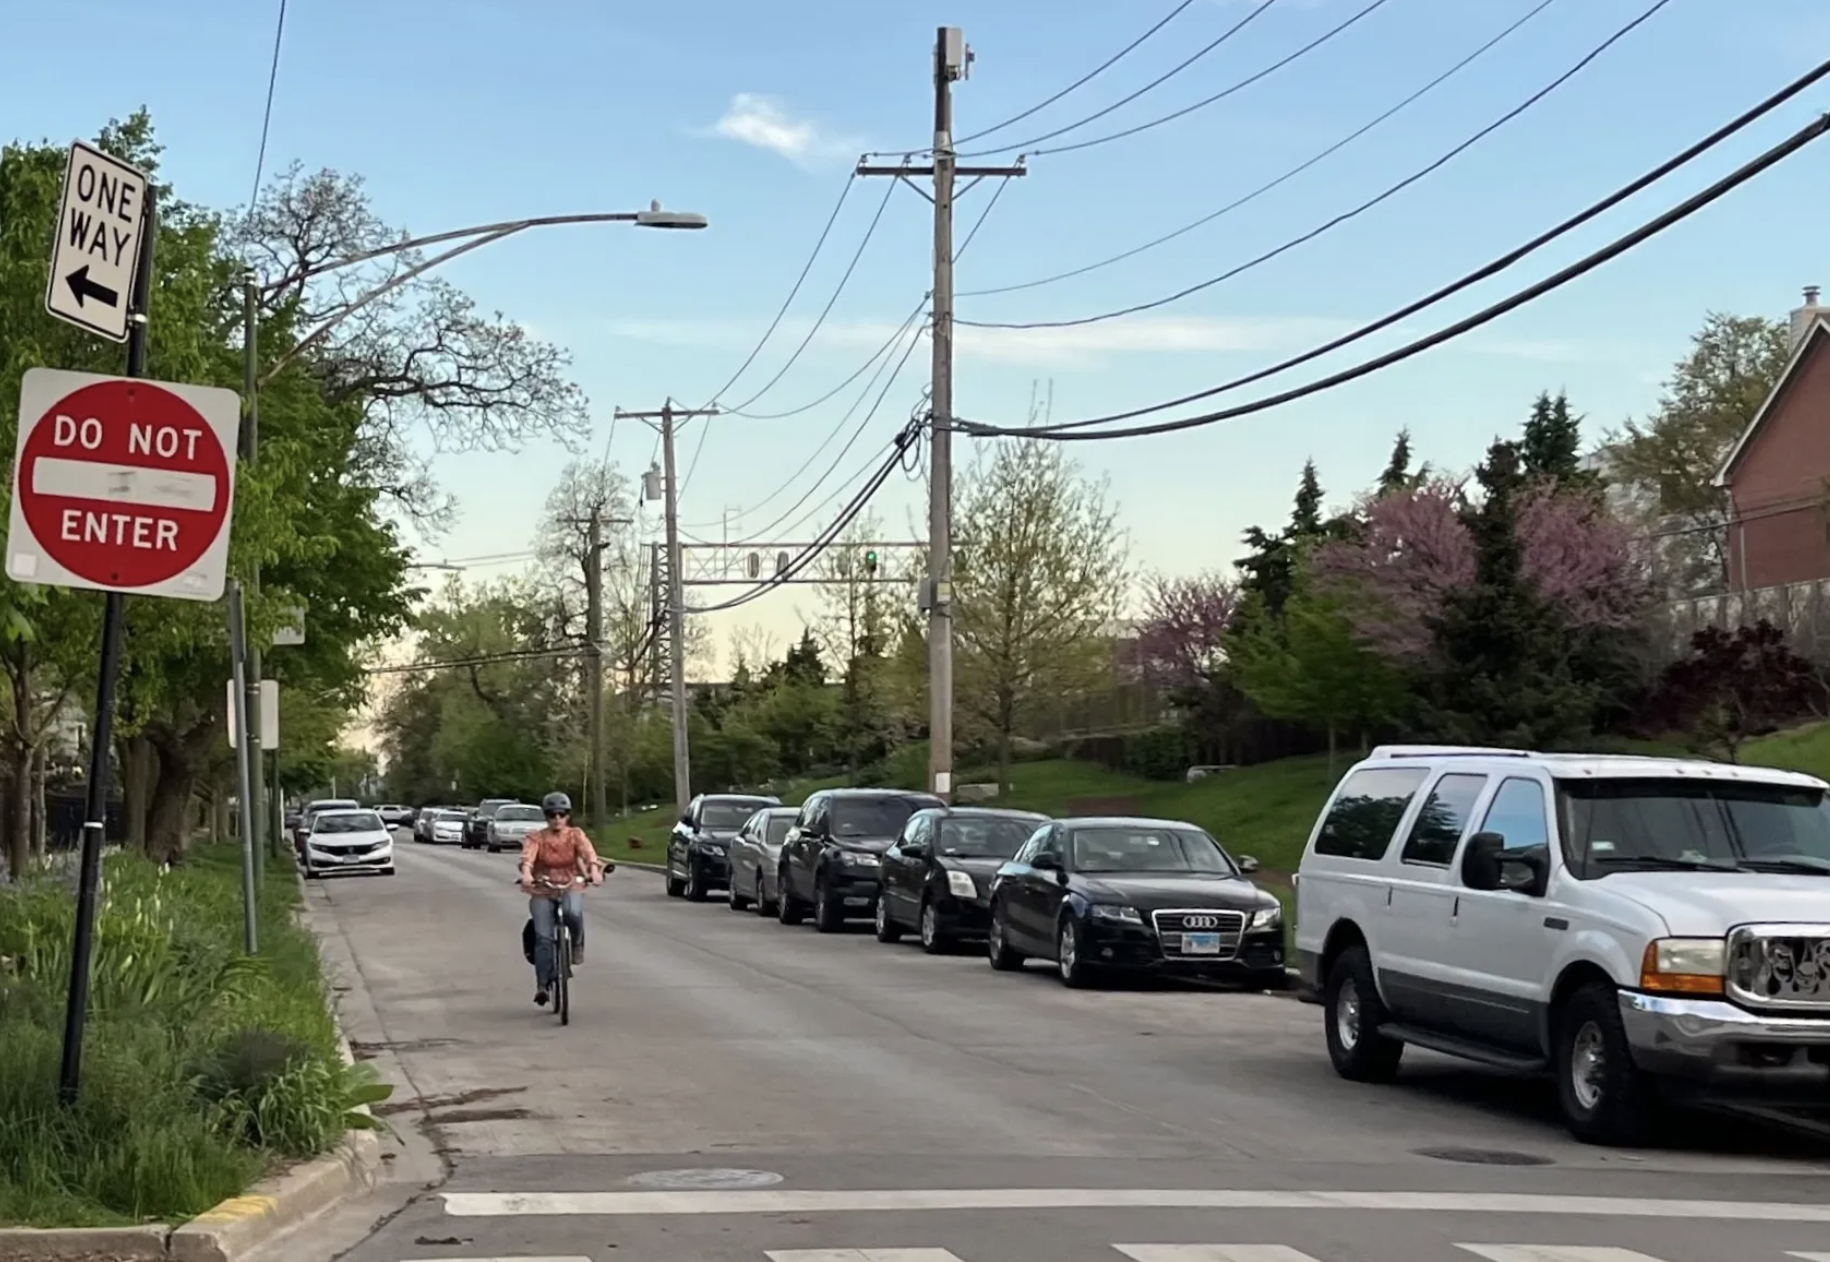 Intersection of Ravenswood Avenue with cyclist